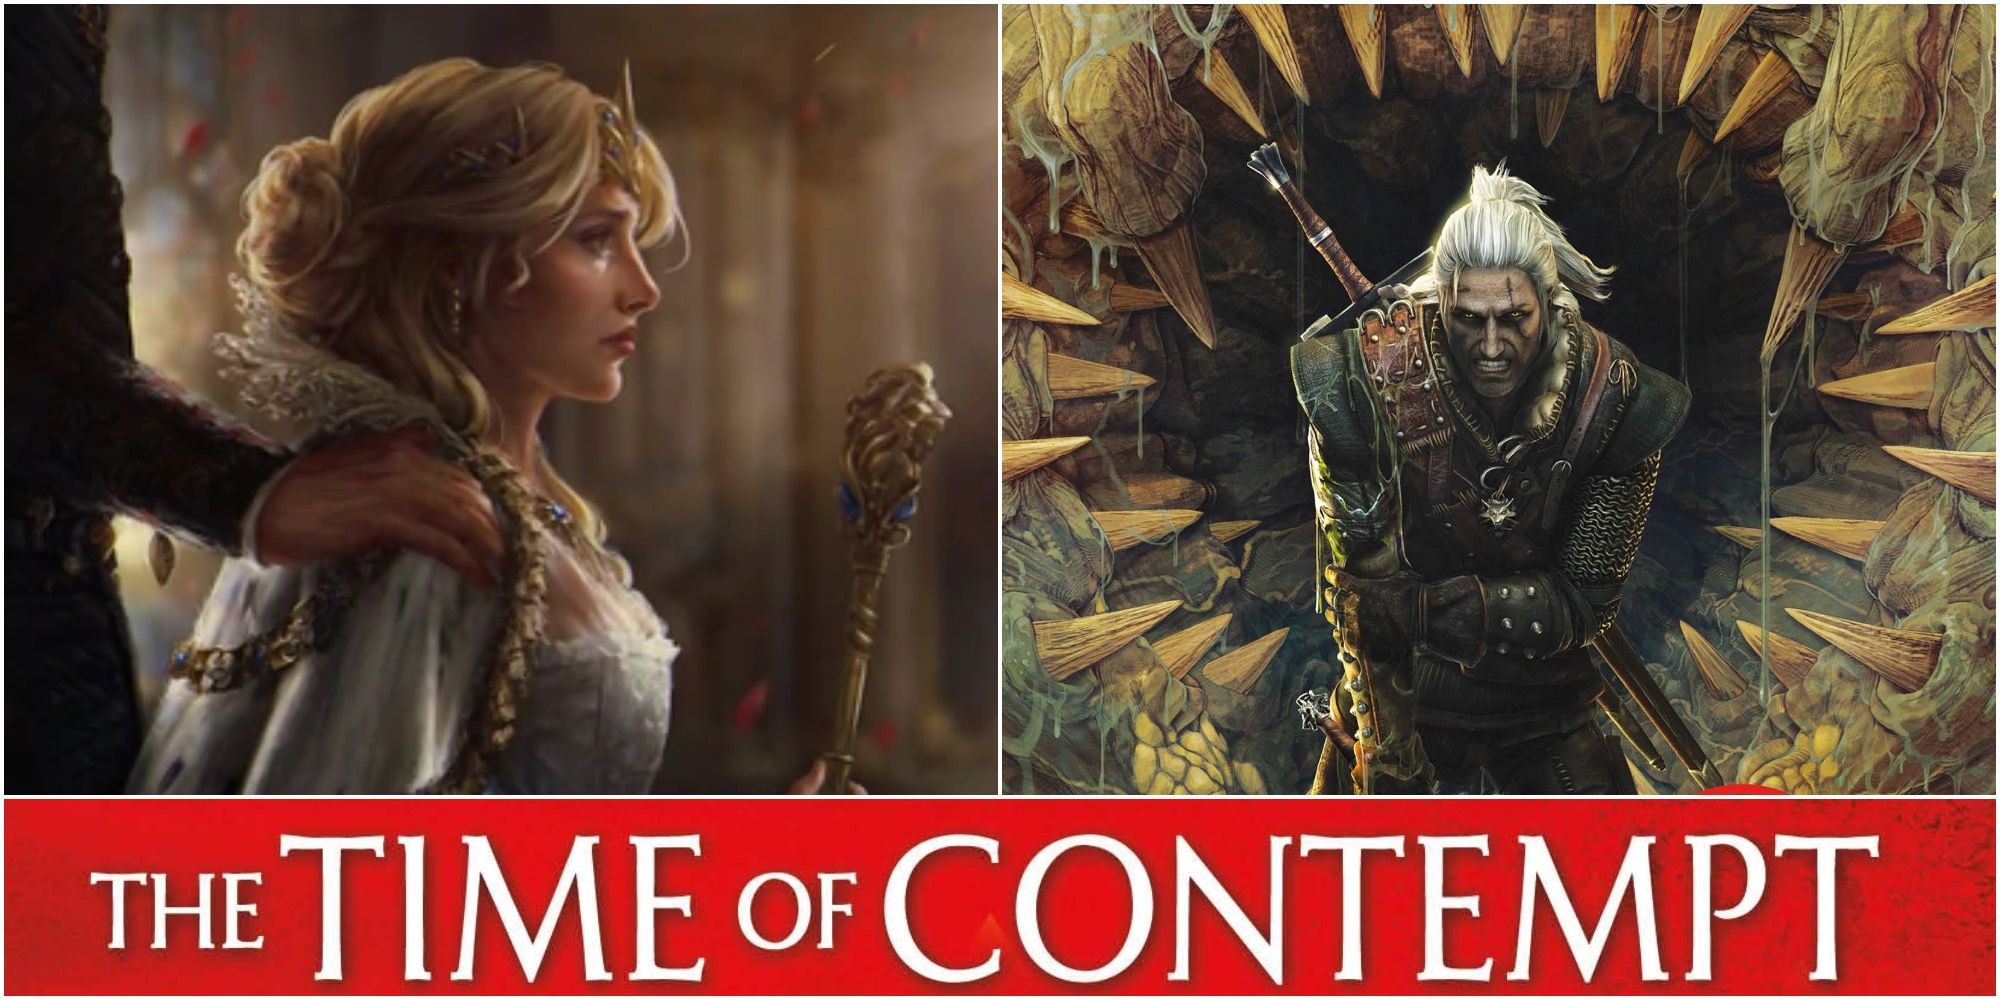 Collage Of The Witcher Novels Time Of Contempt Andrzej Sapkowski False Ciri And Geralt Of Rivia